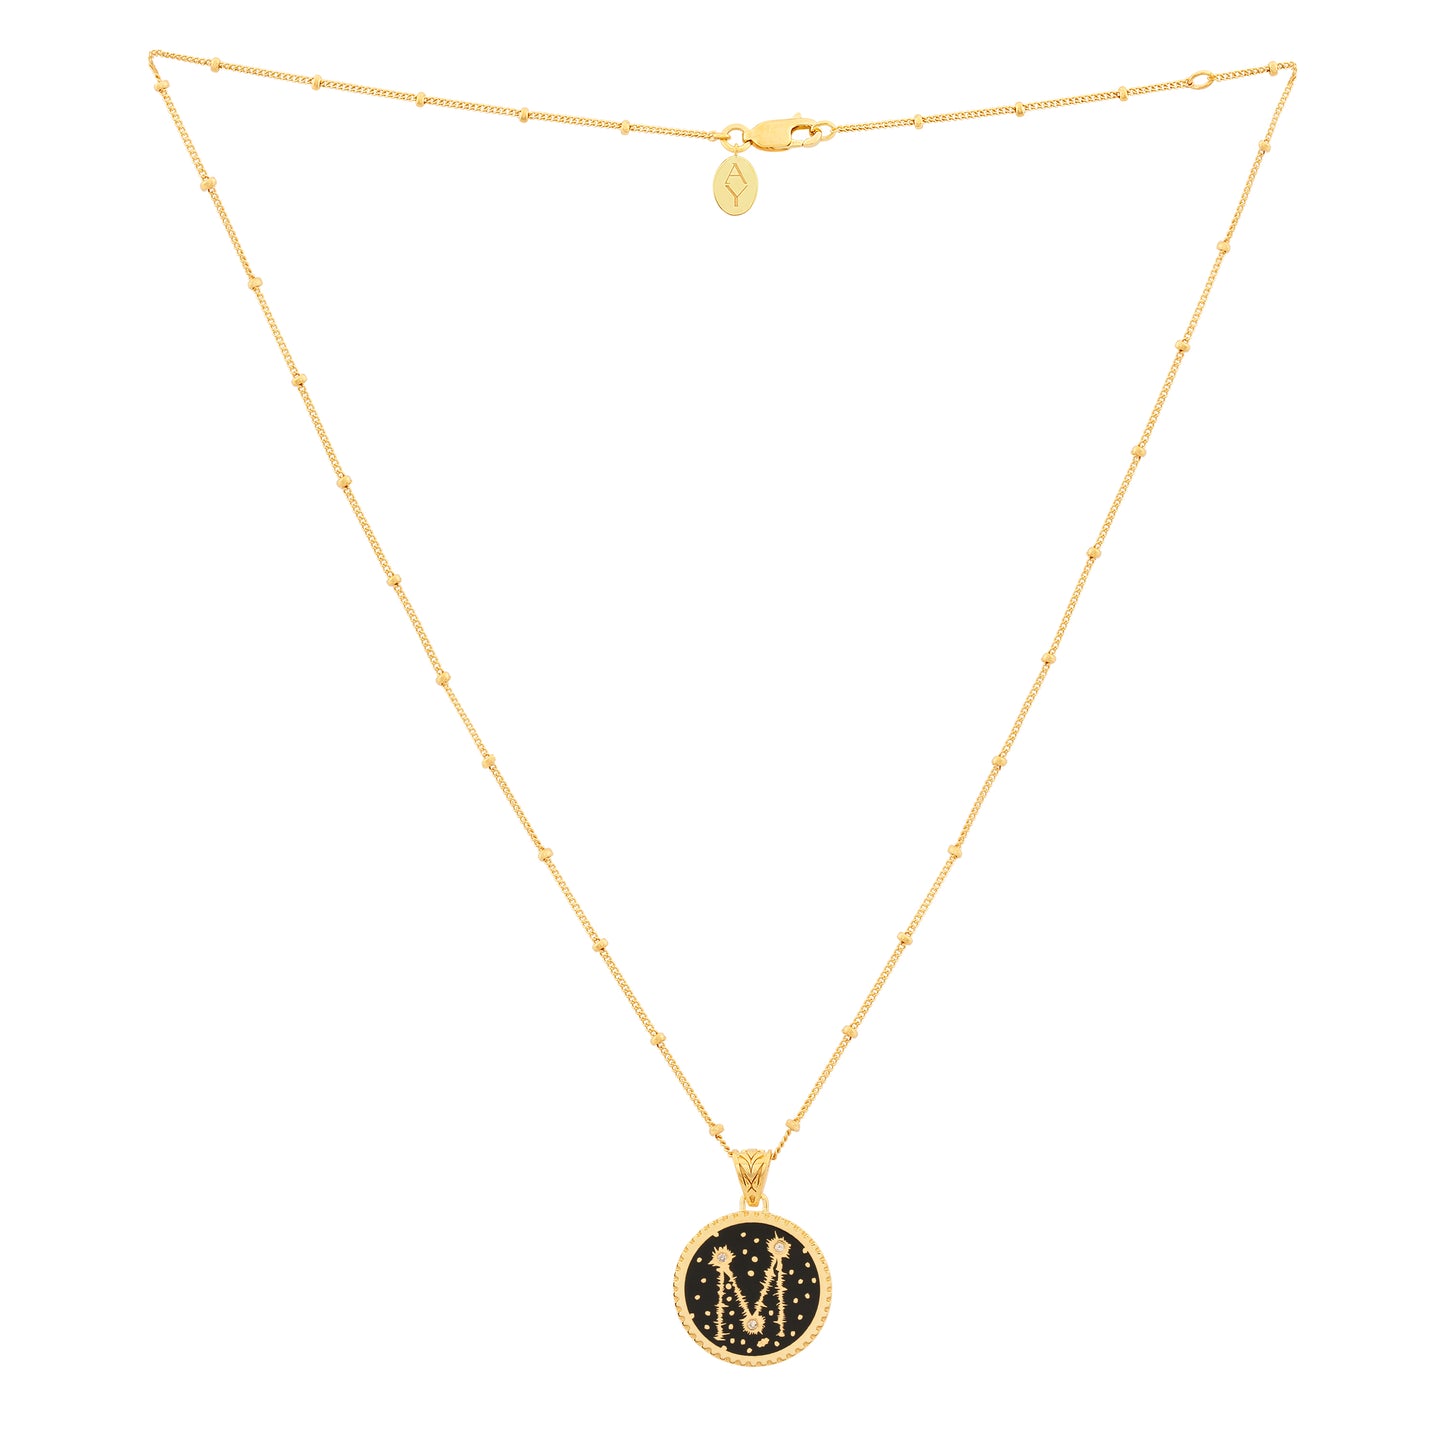 image of sparkler diamond initial necklace, letter M, showing full length of chain on white background